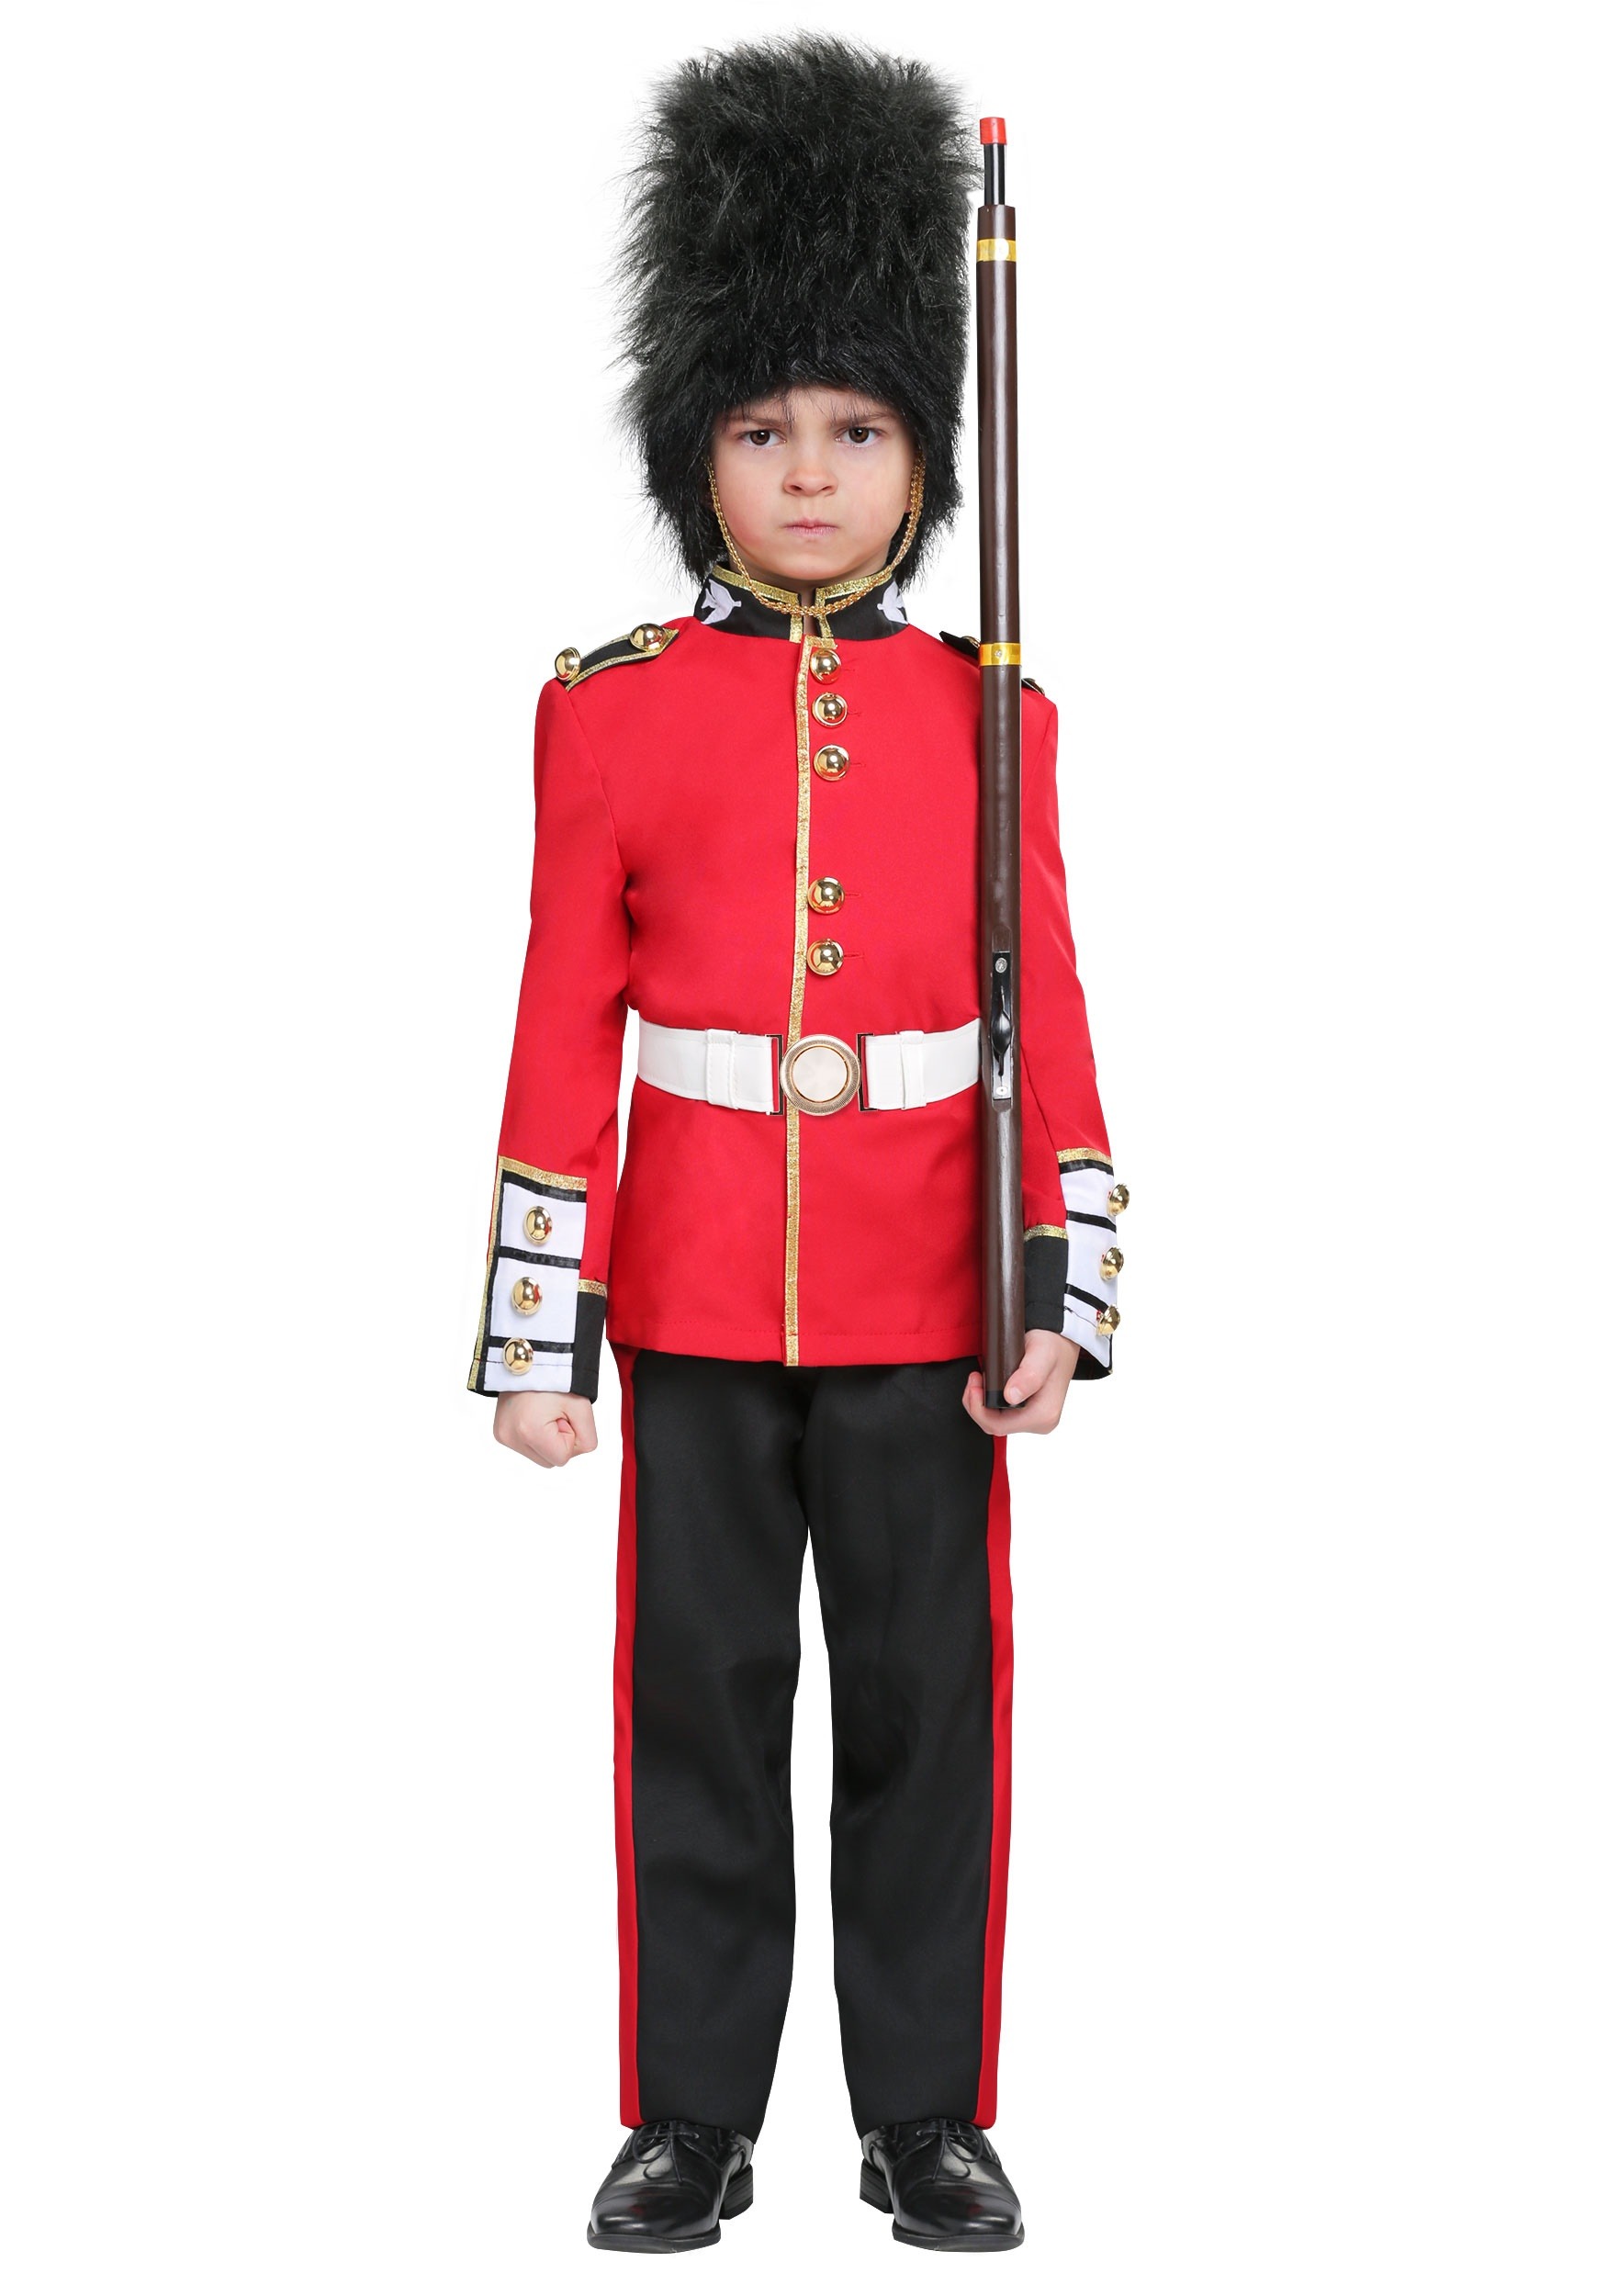 Boys Buzby Guard Royal British London Soldier Fancy Dress Costume Outfit 4-12 yr 